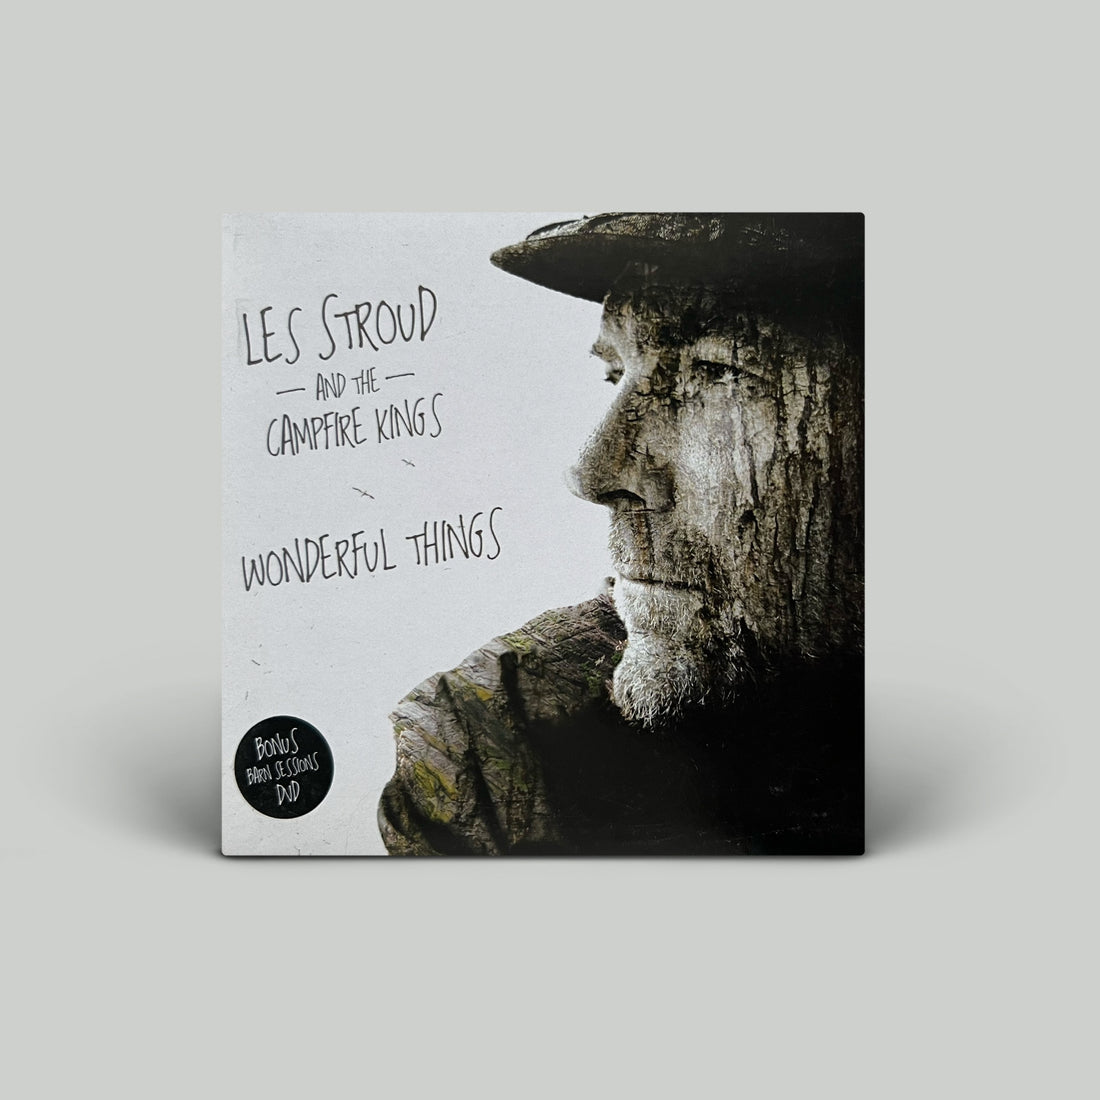 Survivorman - Les Stroud & The Campfire Kings Wonderful Things Collection (CD/DVD)